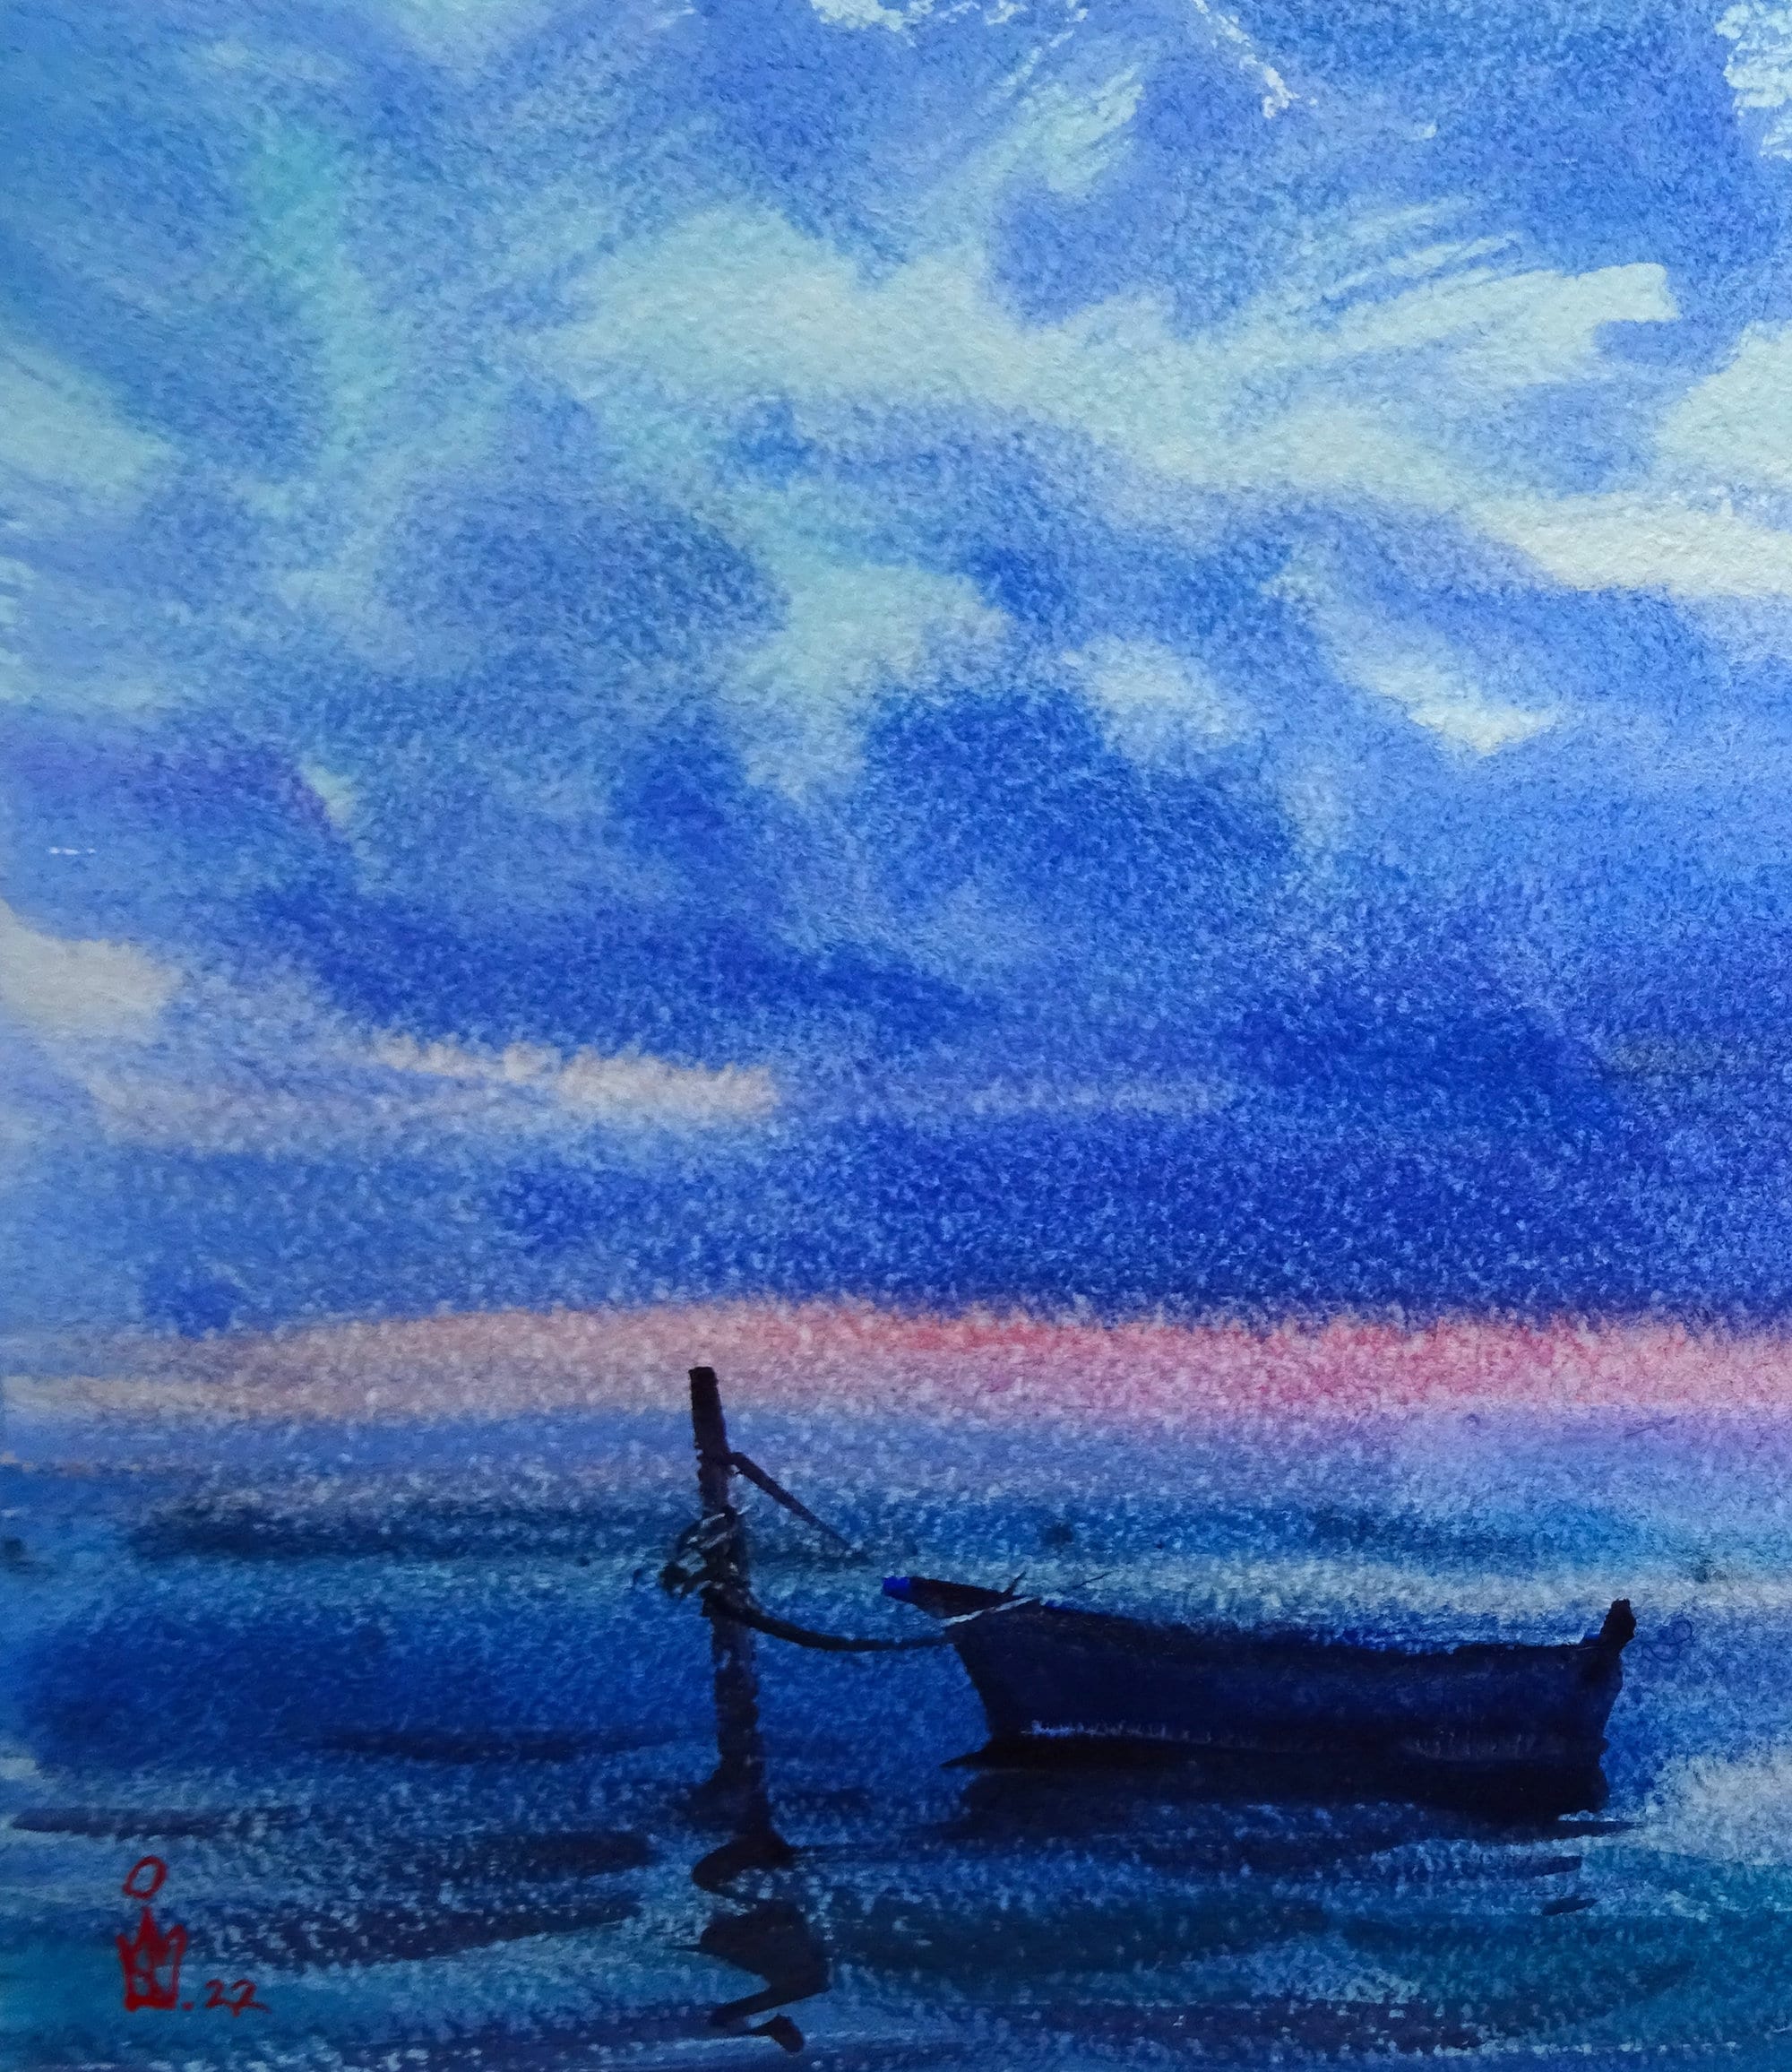 Original Ukrainian Watercolor Painting, Fisherman in a Boat at Sunset,  Evening Fishing at Sea, Realistic Reflection in Water, Art Home Decor 